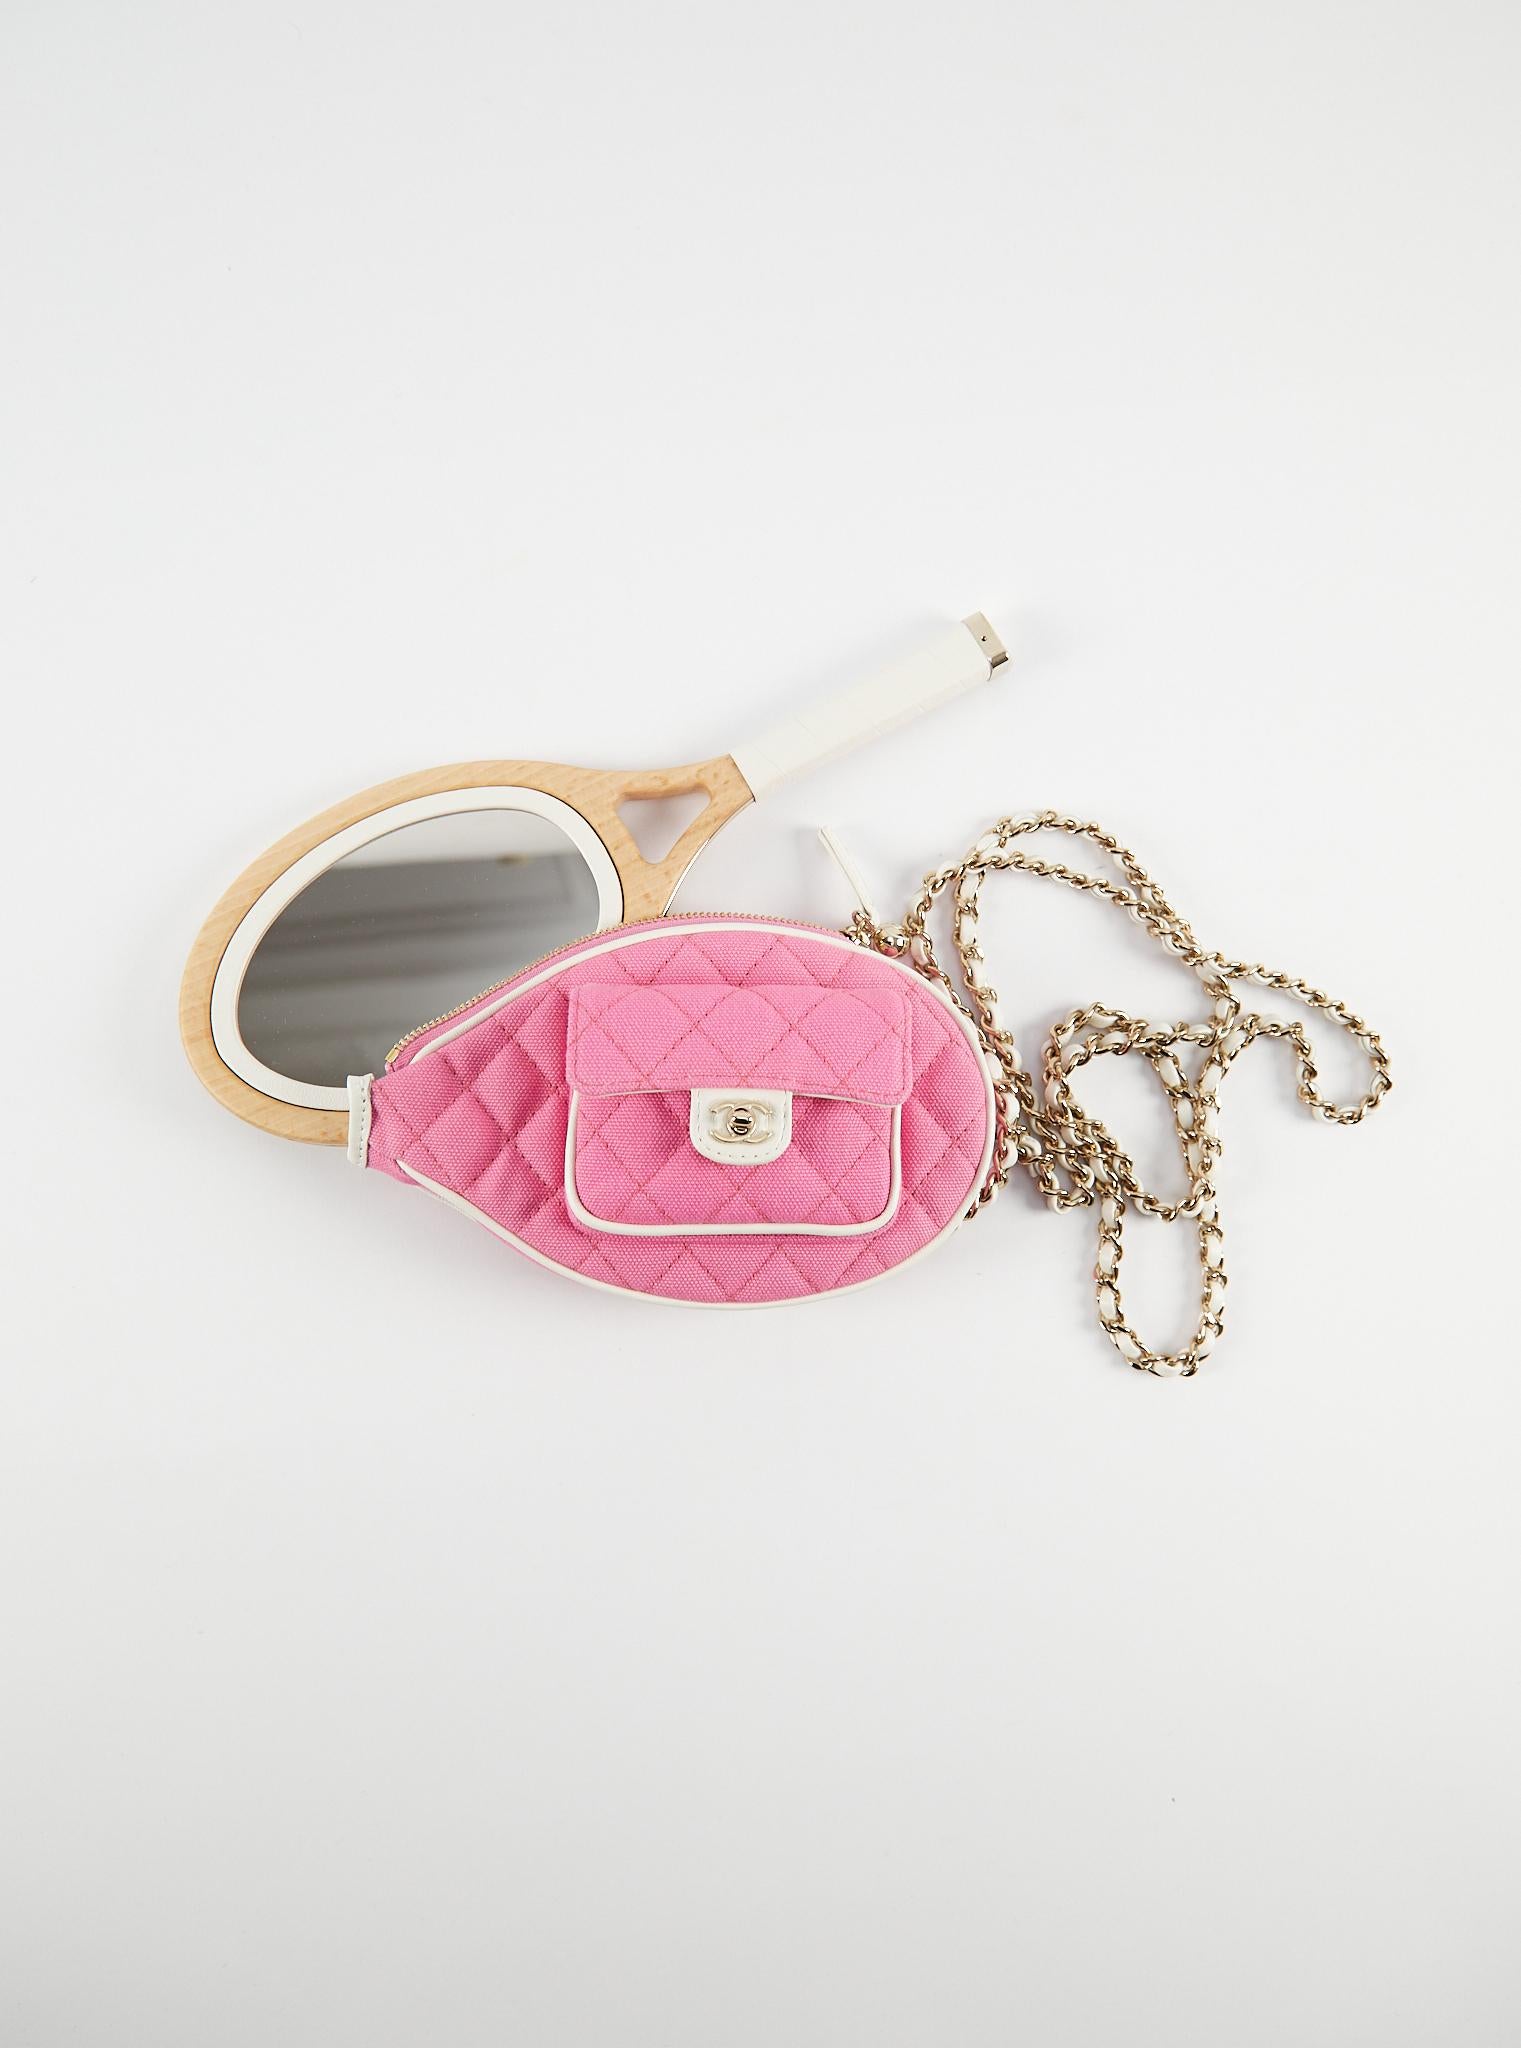 Chanel Cruise 2023 Mini-Raquet Mirror Clutch in Pink 

Quilted Cotton, Mirror in wood with Gold-tone Hardware 

Accompanied by: Chanel Box, Dustbag & Authenticity Chip